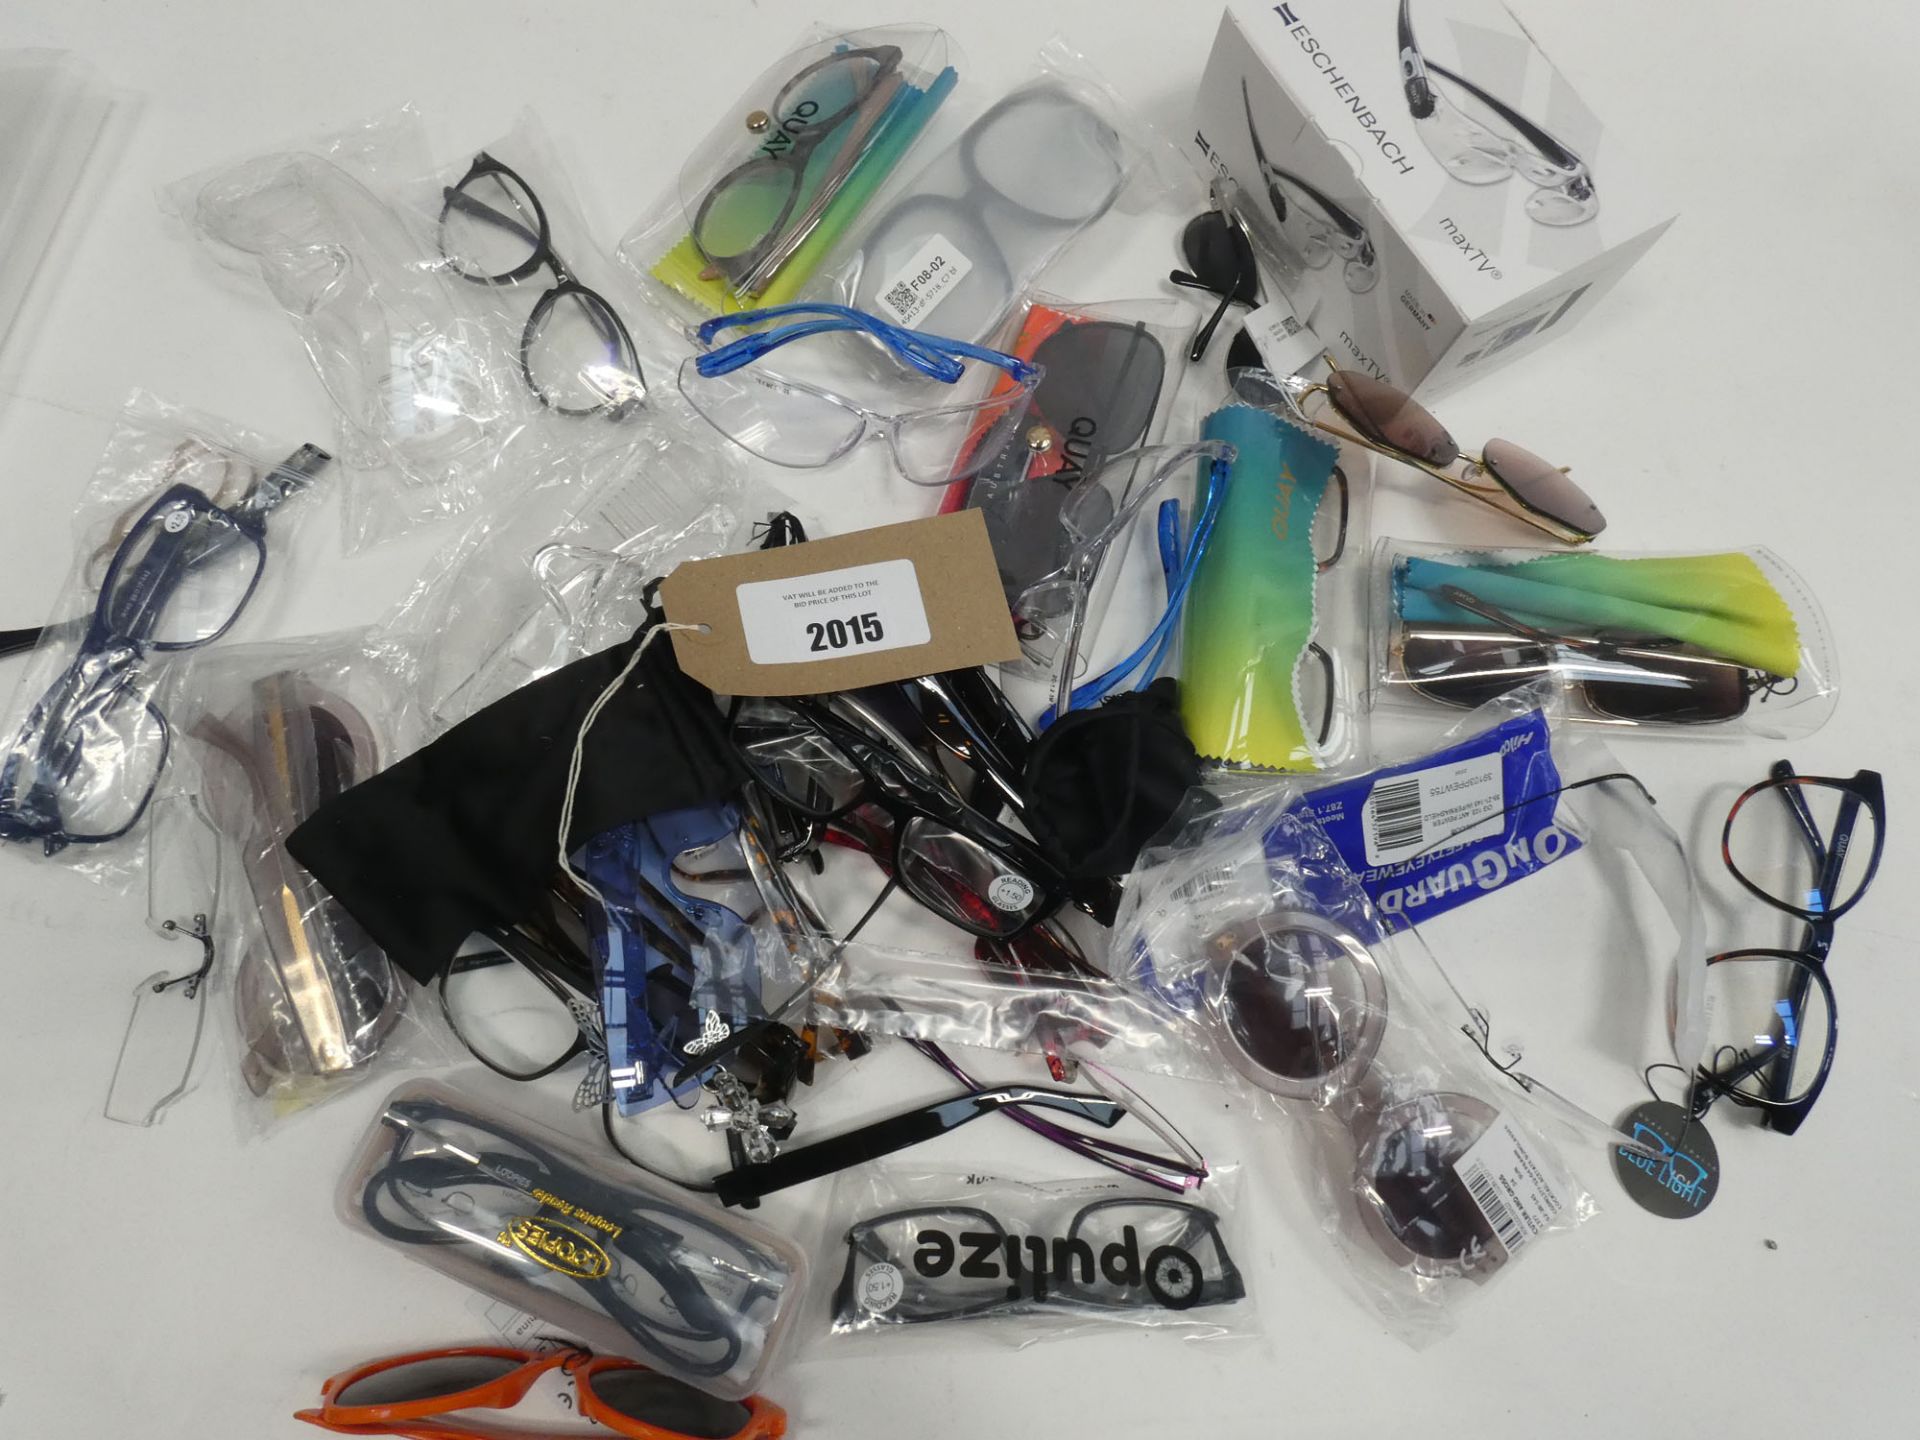 Bag of assorted glasses and sunglasses